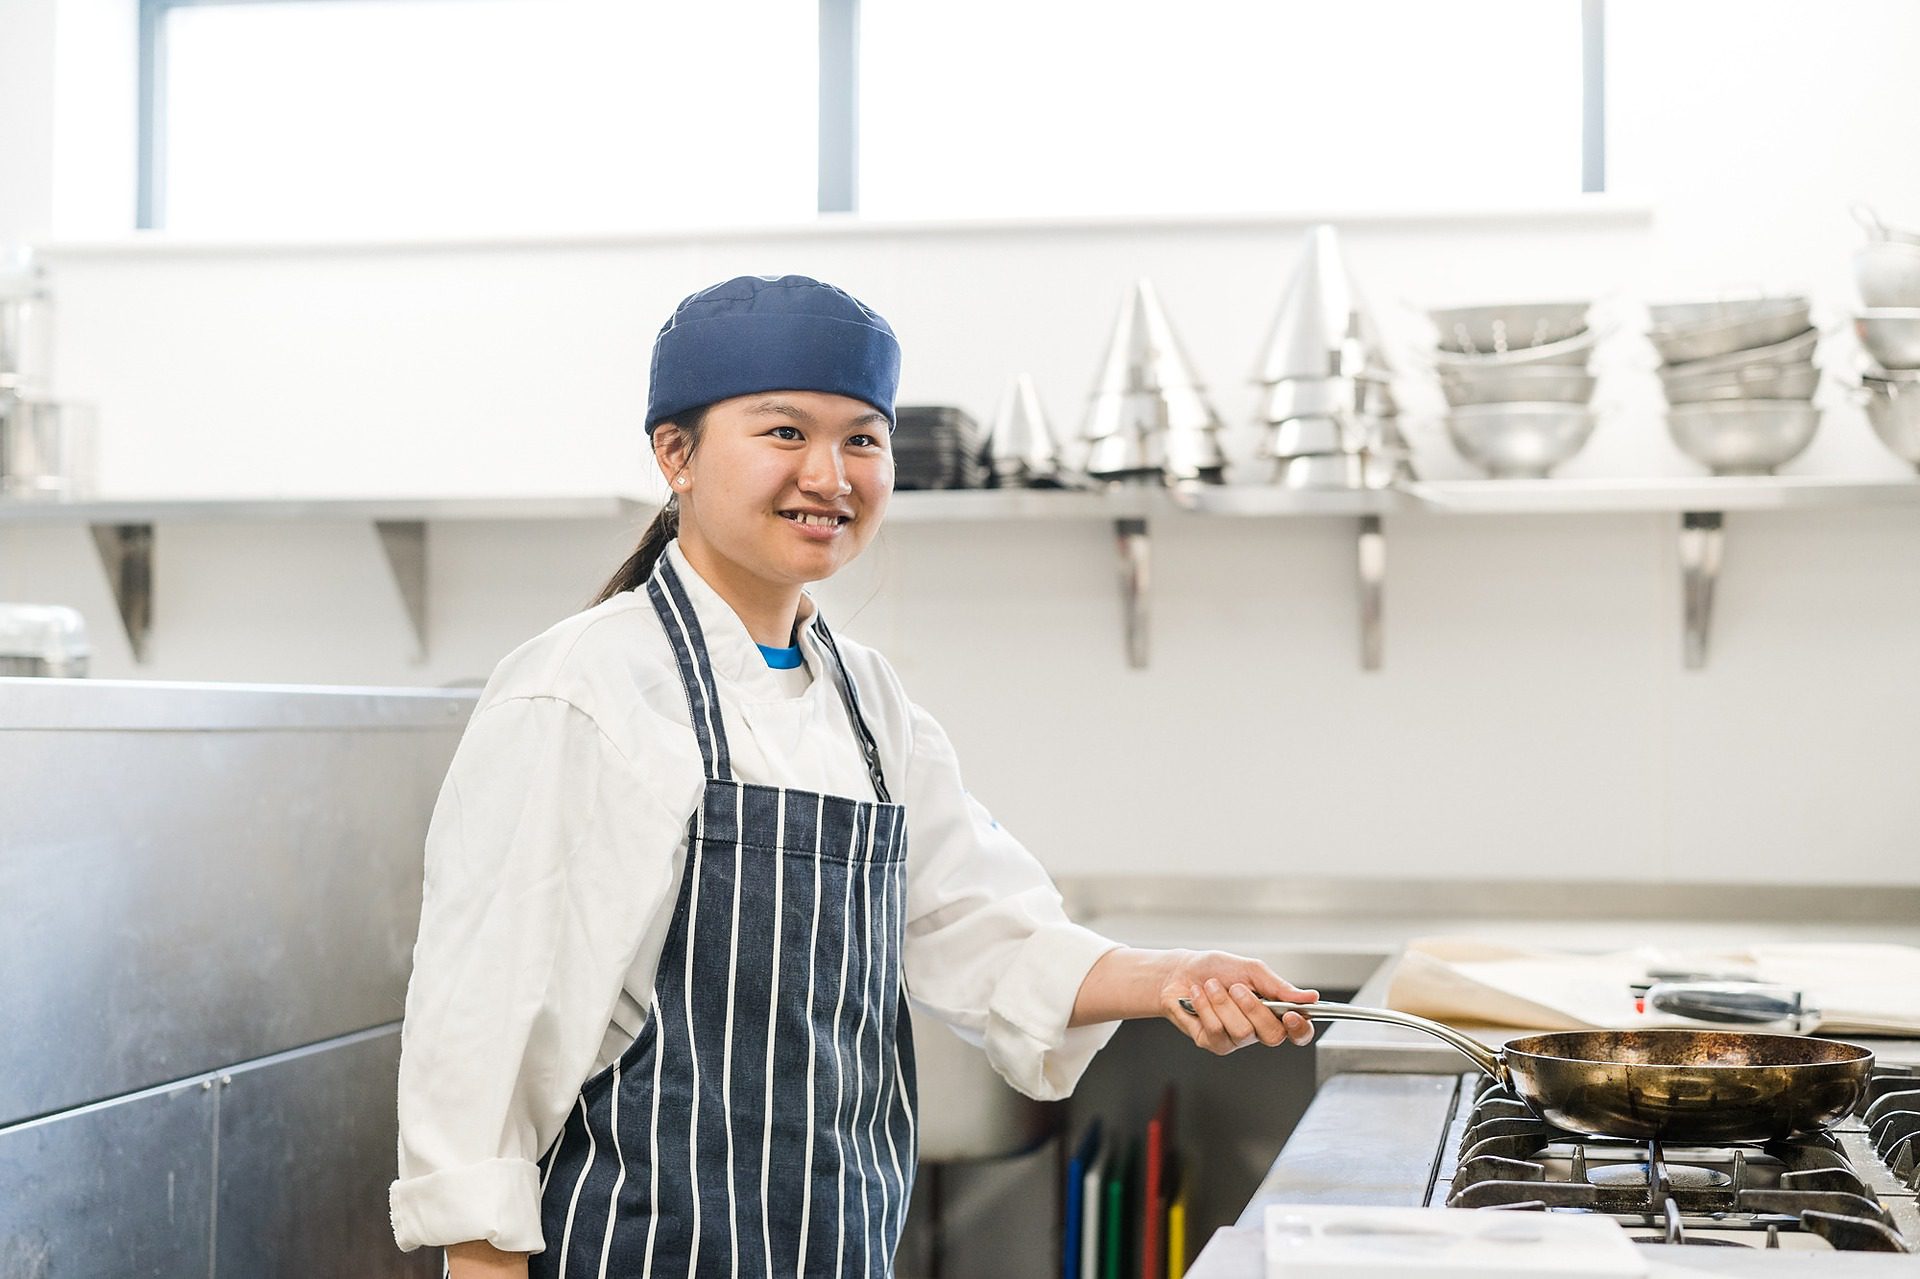 Student wearing blue apron and a toque standing preparing food in kitchen